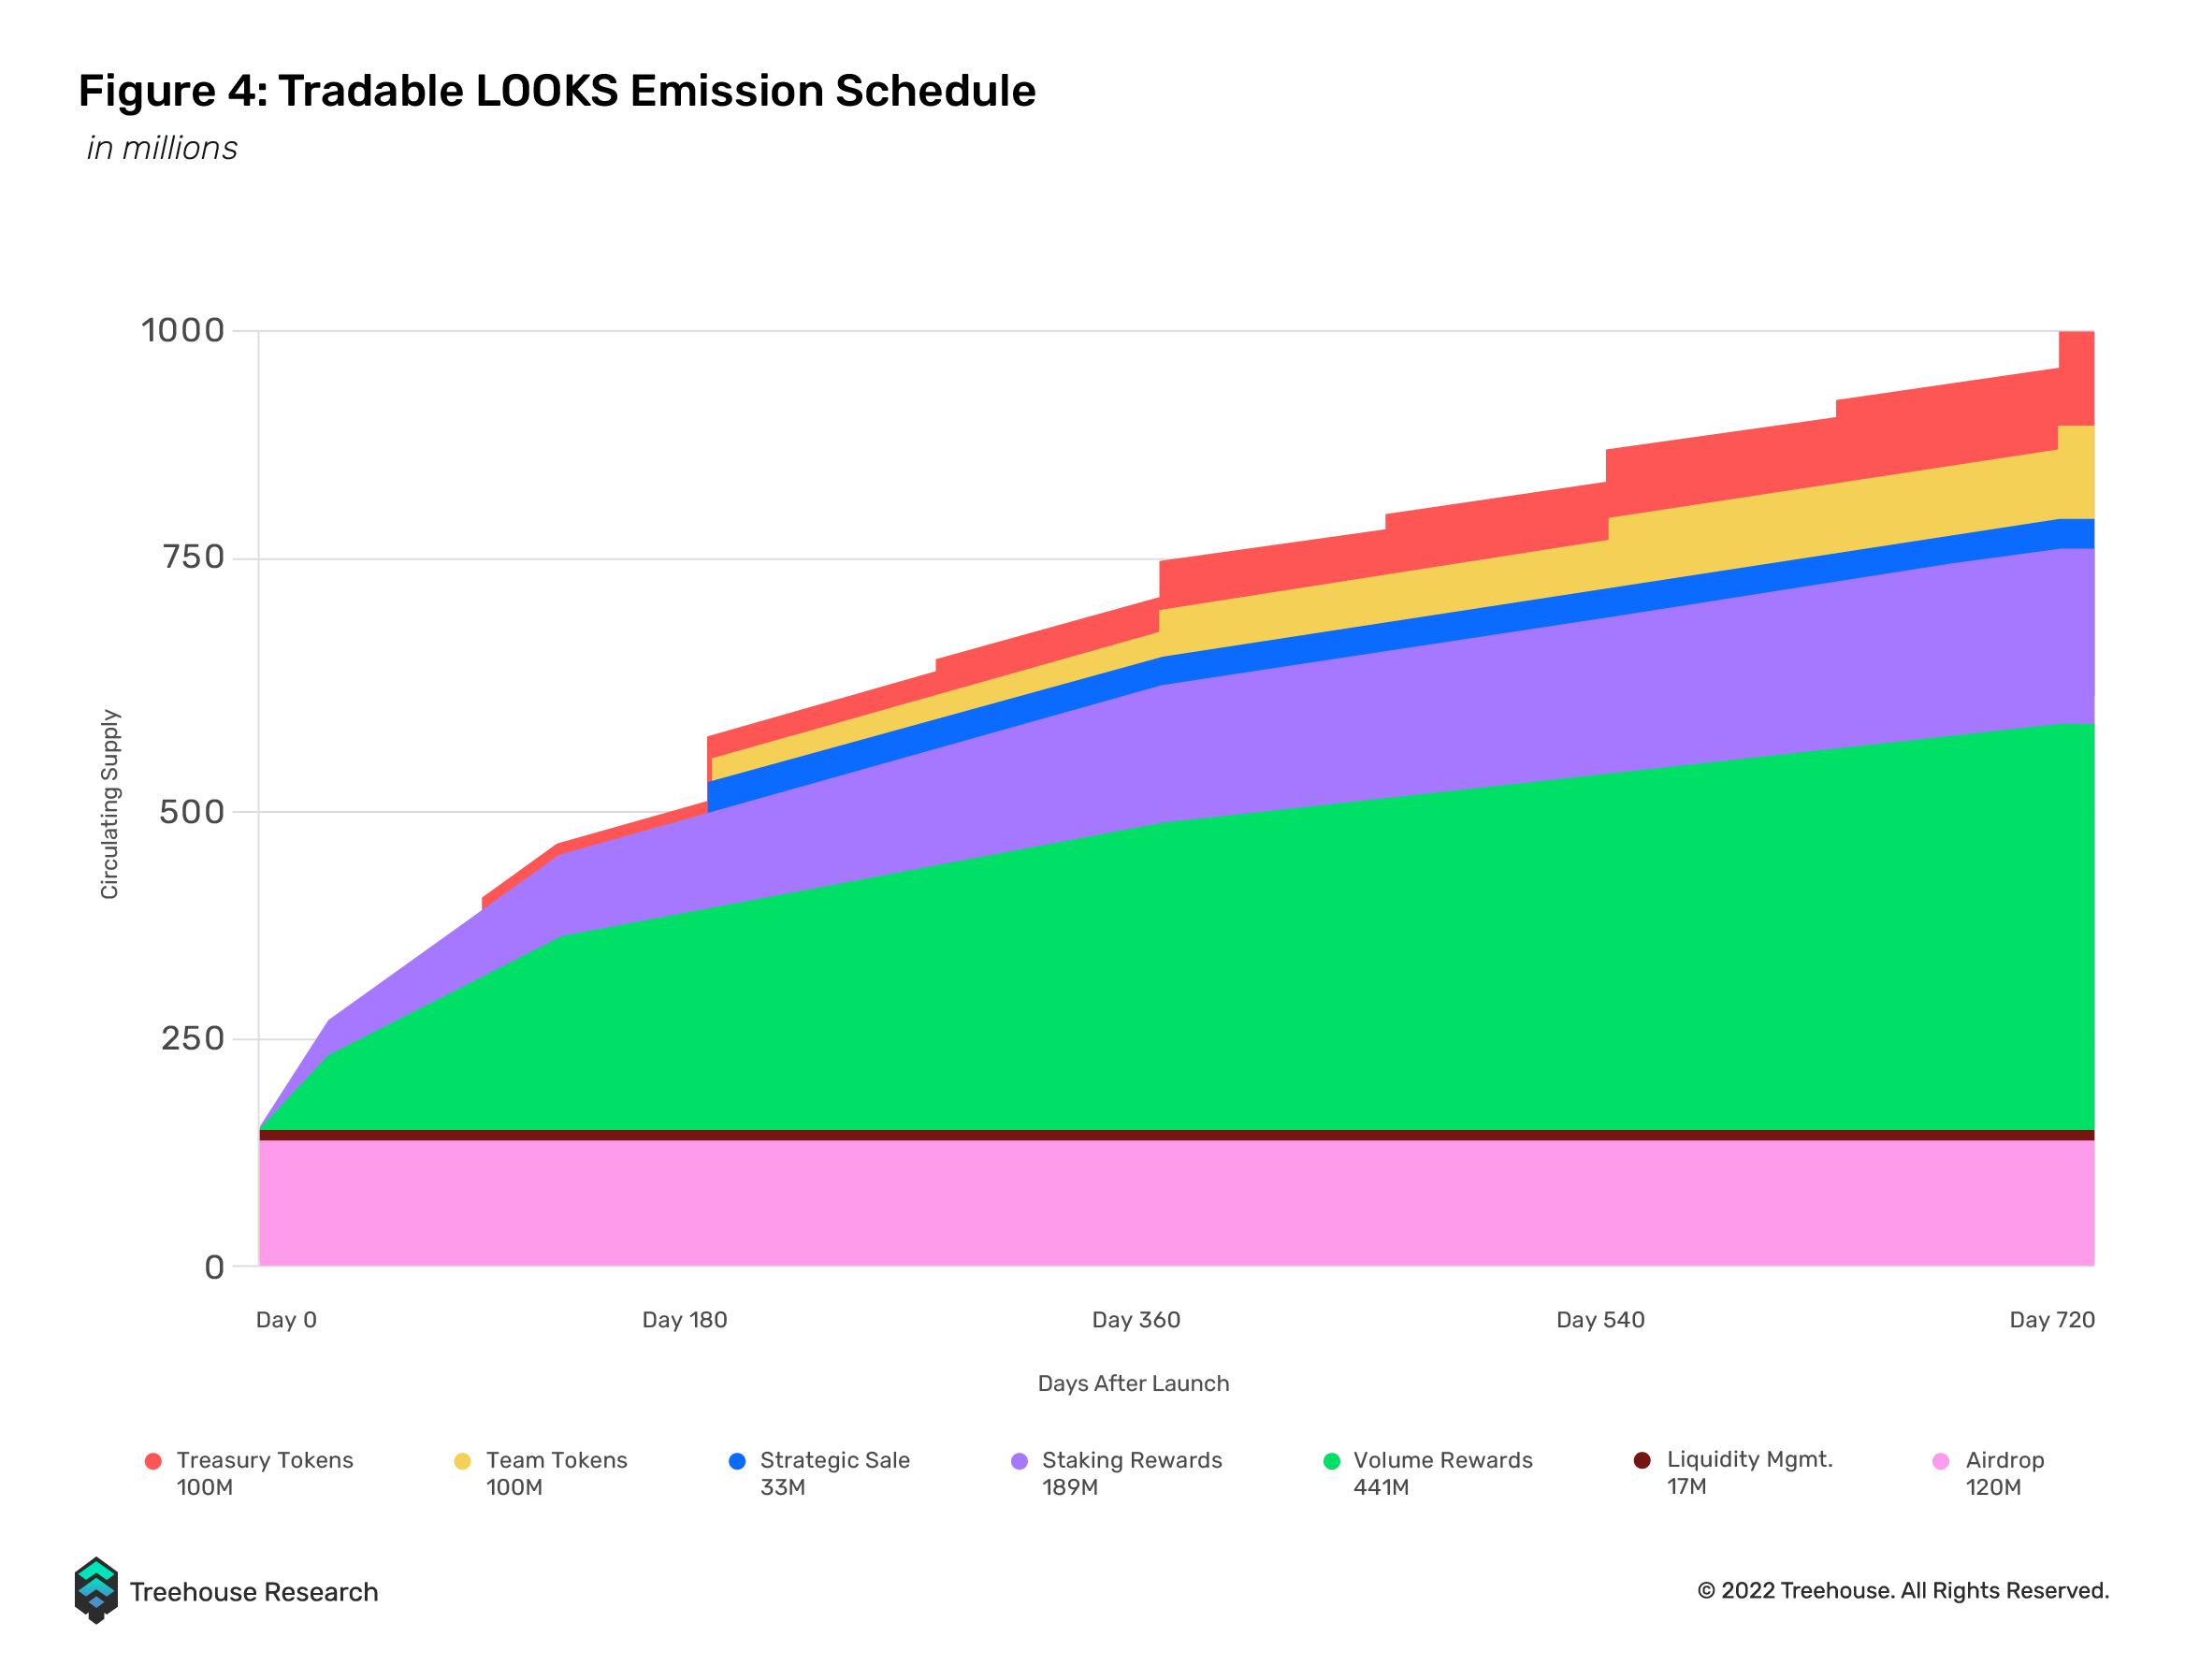 tradable LOOKS emission schedule